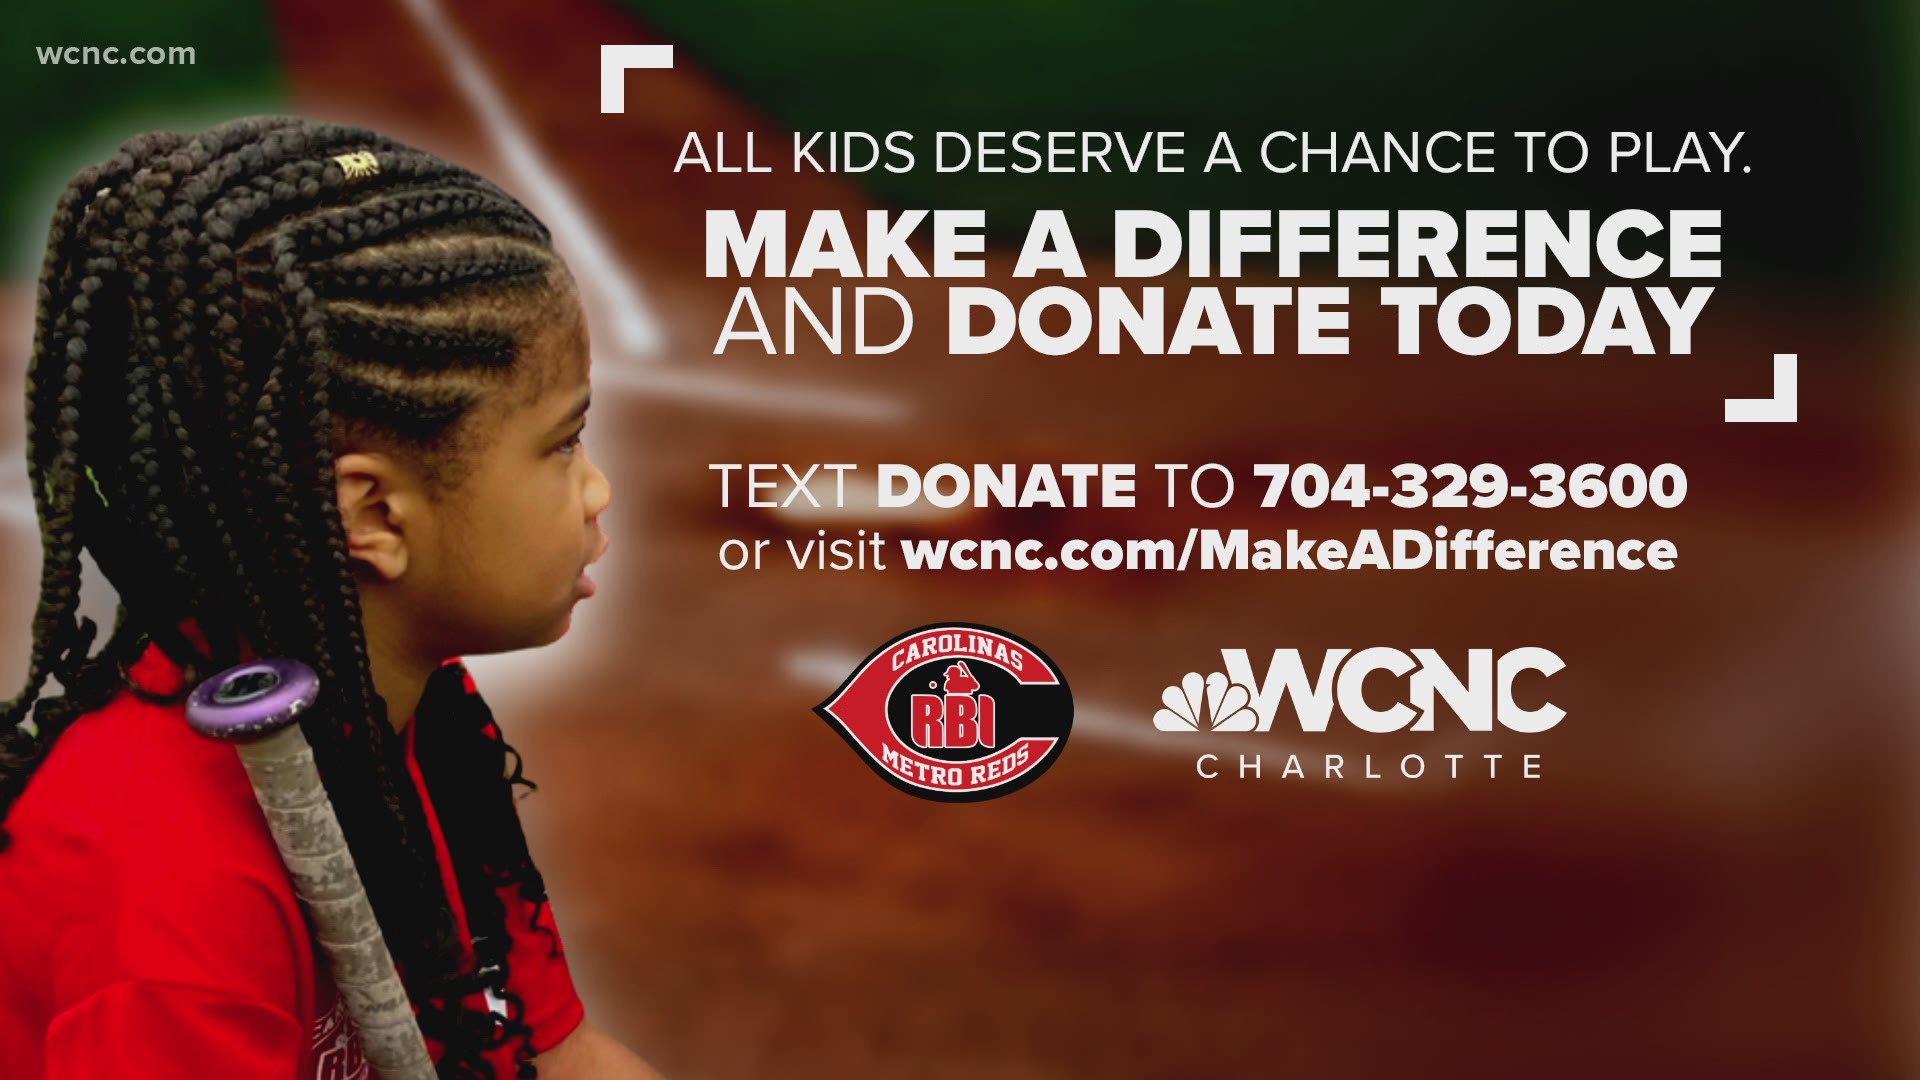 The organization makes baseball affordable for underserved communities while teaching children important life skills